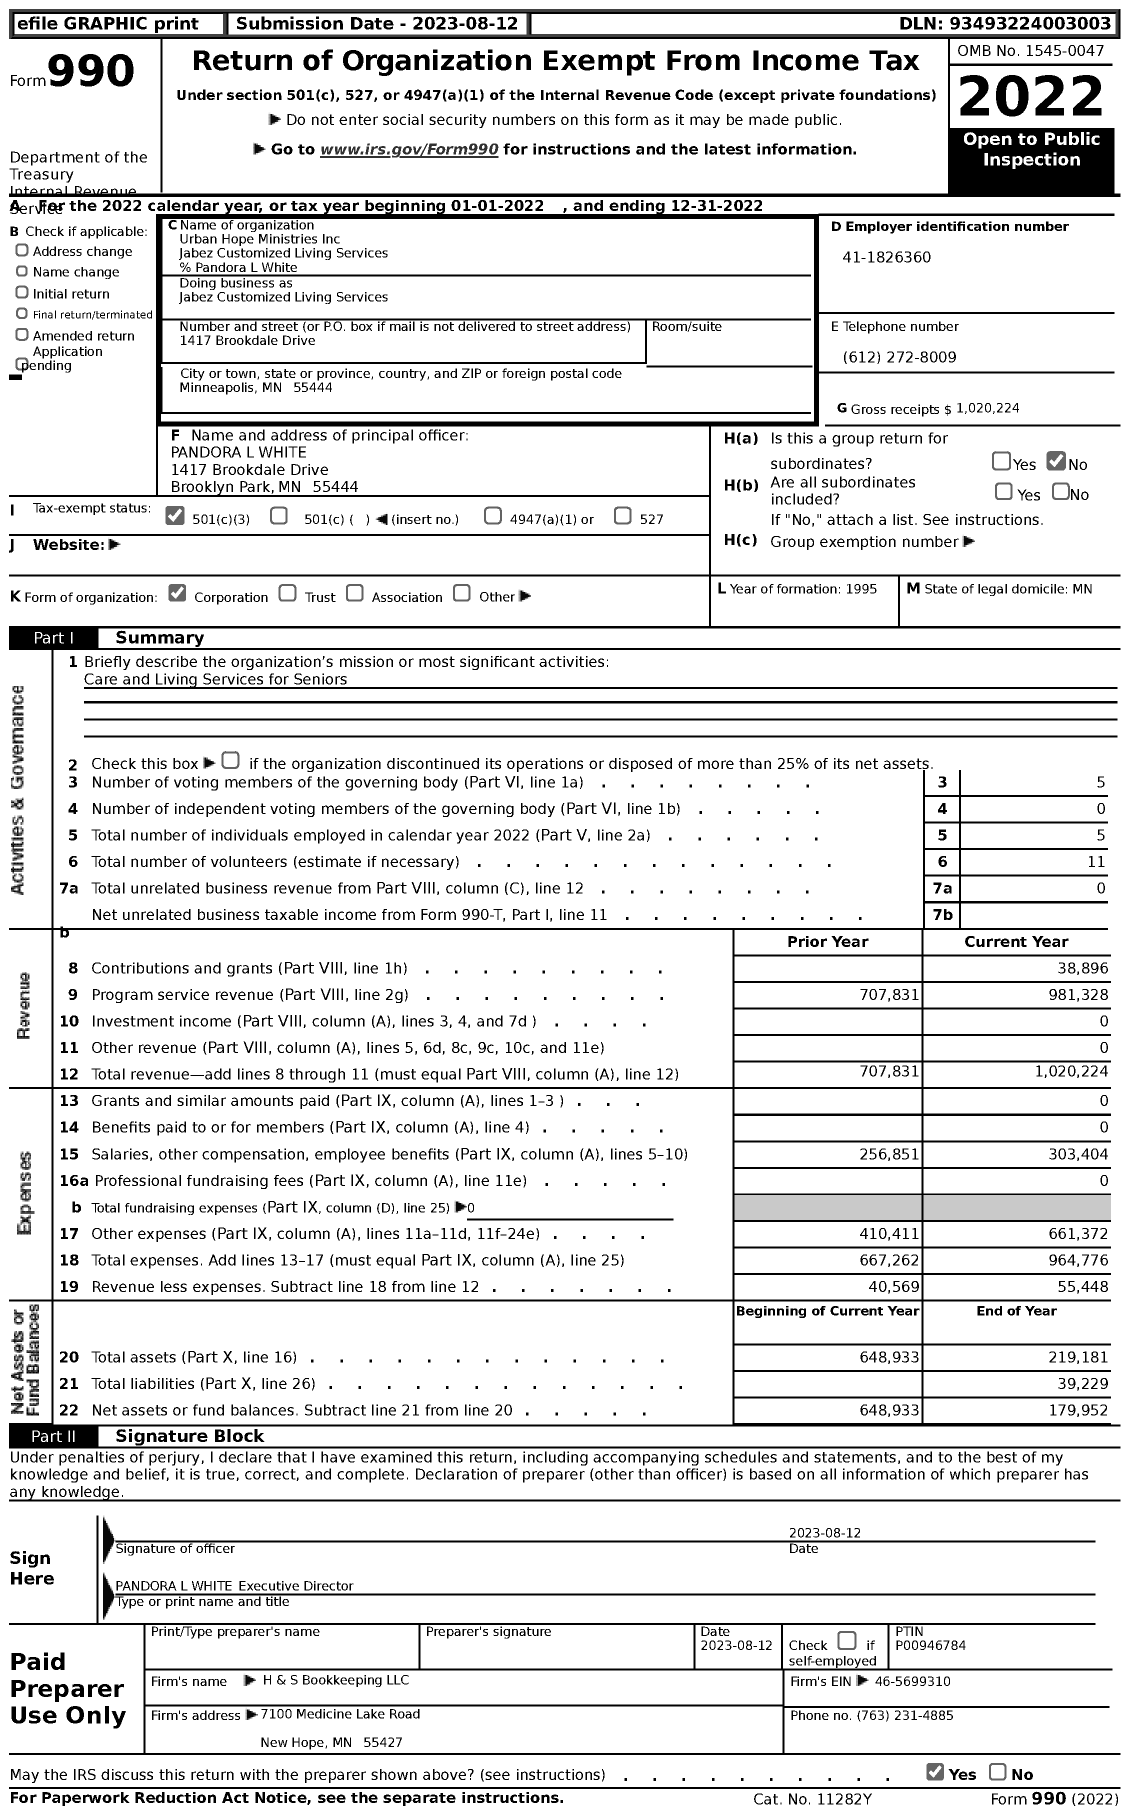 Image of first page of 2022 Form 990 for Urban Hope Ministries Inc Jabez Customized Living Services